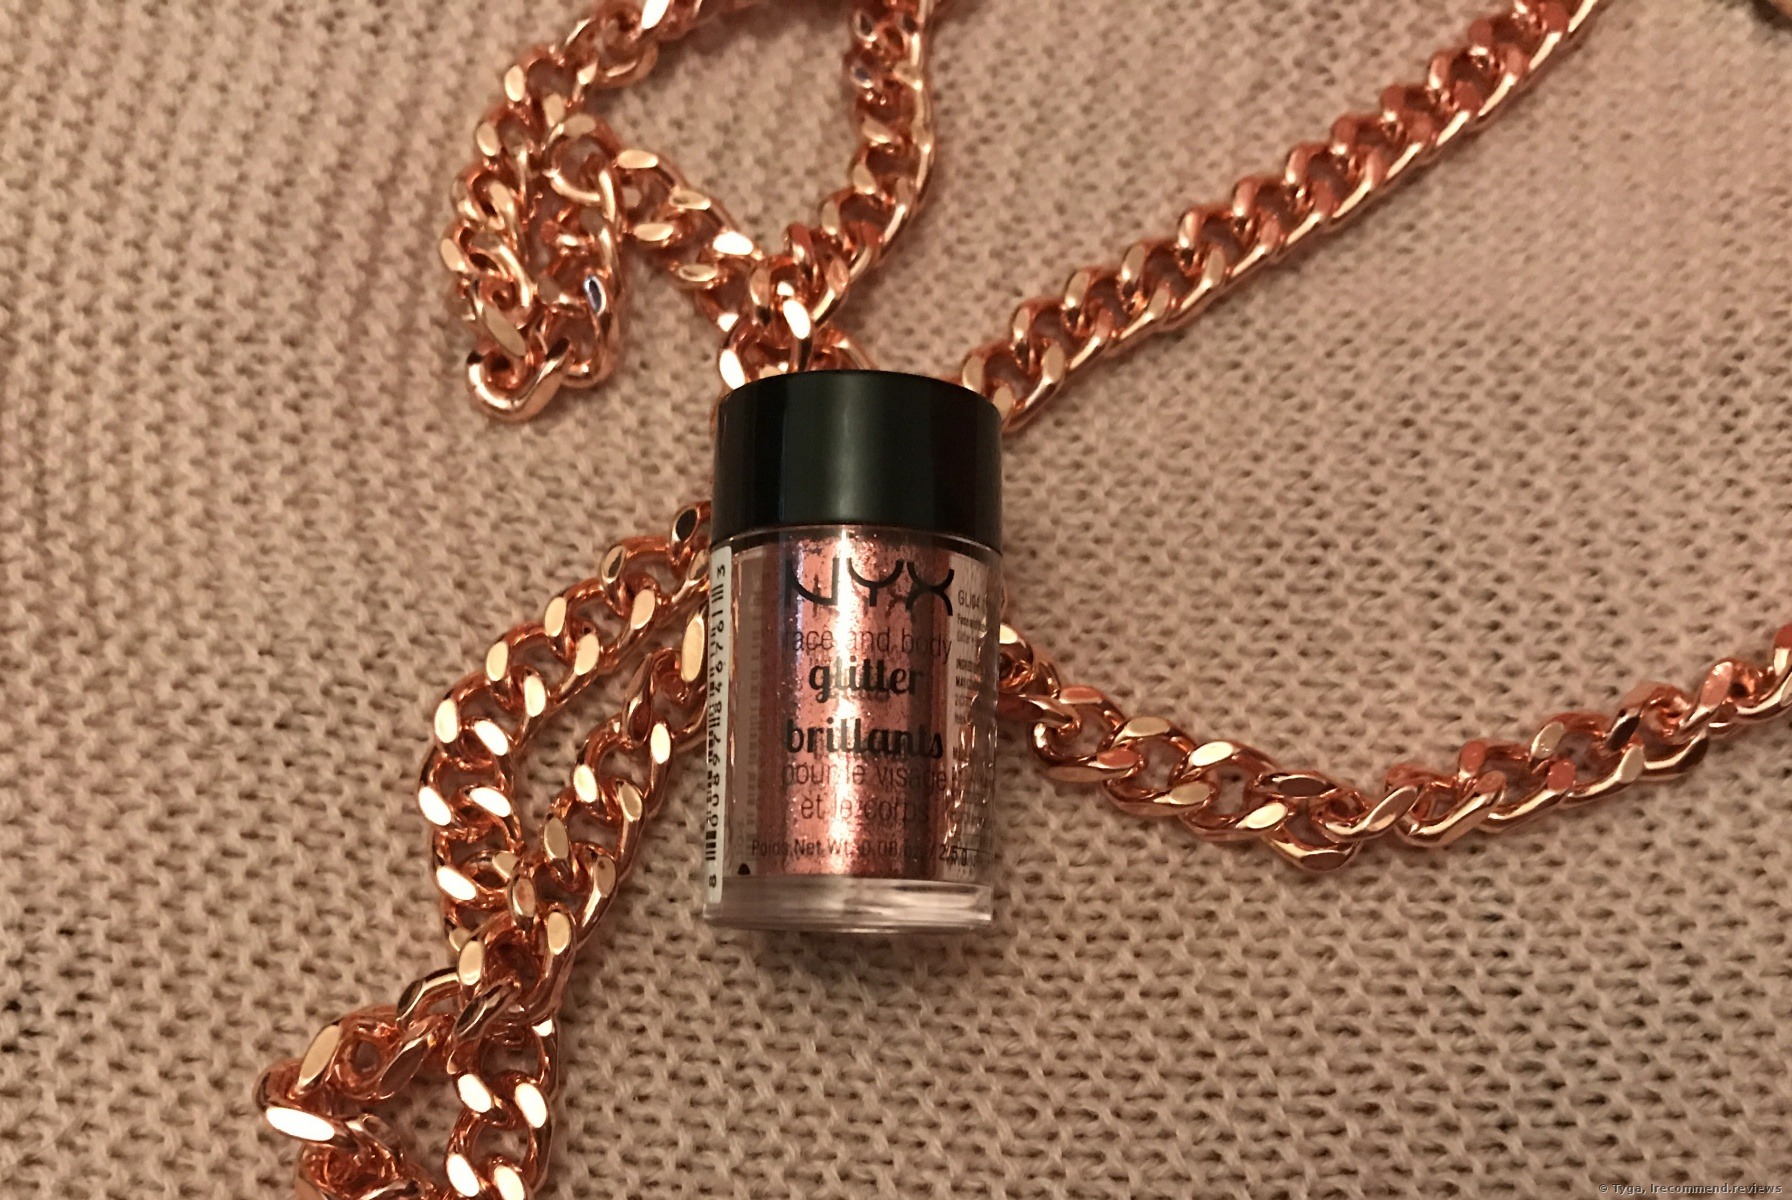 Nyx Glitter Primer 🦋 If you - The Beauty Connoisseur NG